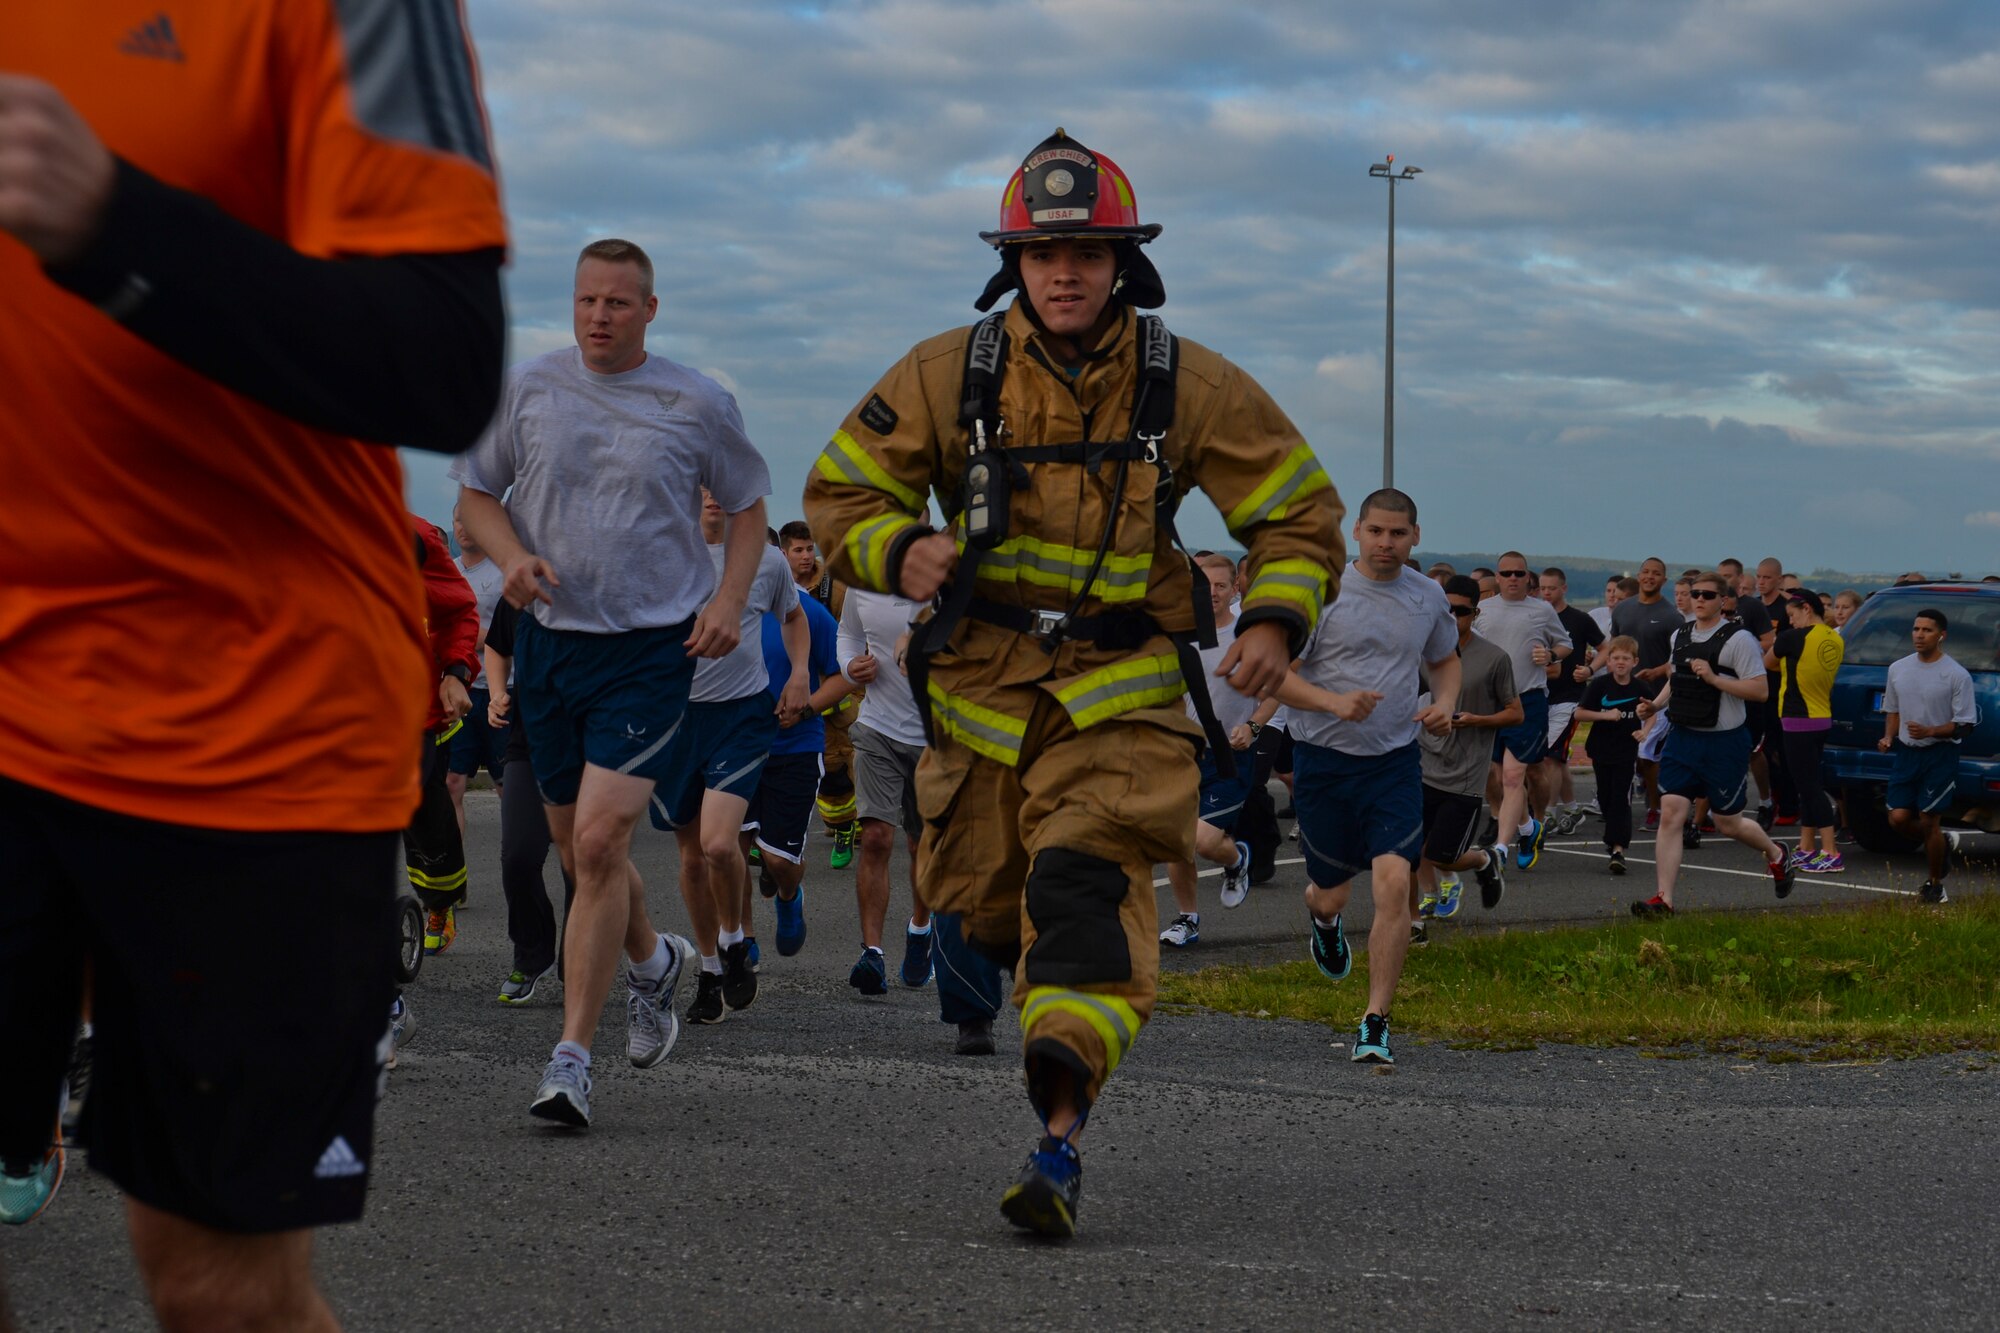 U.S. Air Force Staff Sgt. Bryan Souder, a firefighter assigned to the 52nd Civil Engineer Squadron and Bellevue, Neb., native, runs beside fellow participants in the Jog for Joe Memorial 5K at the base track at Spangdahlem Air Base, Germany, June 20, 2014. Nearly 500 Airmen and their families participated in the run to commemorate the loss of Staff Sgt. Joseph Hamski, a 52nd CES explosive ordnance disposal flight technician, who was killed in support of Operation Enduring Freedom May 26, 2011. (U.S. Air Force photo by Staff Sgt. Joe W. McFadden/Released)